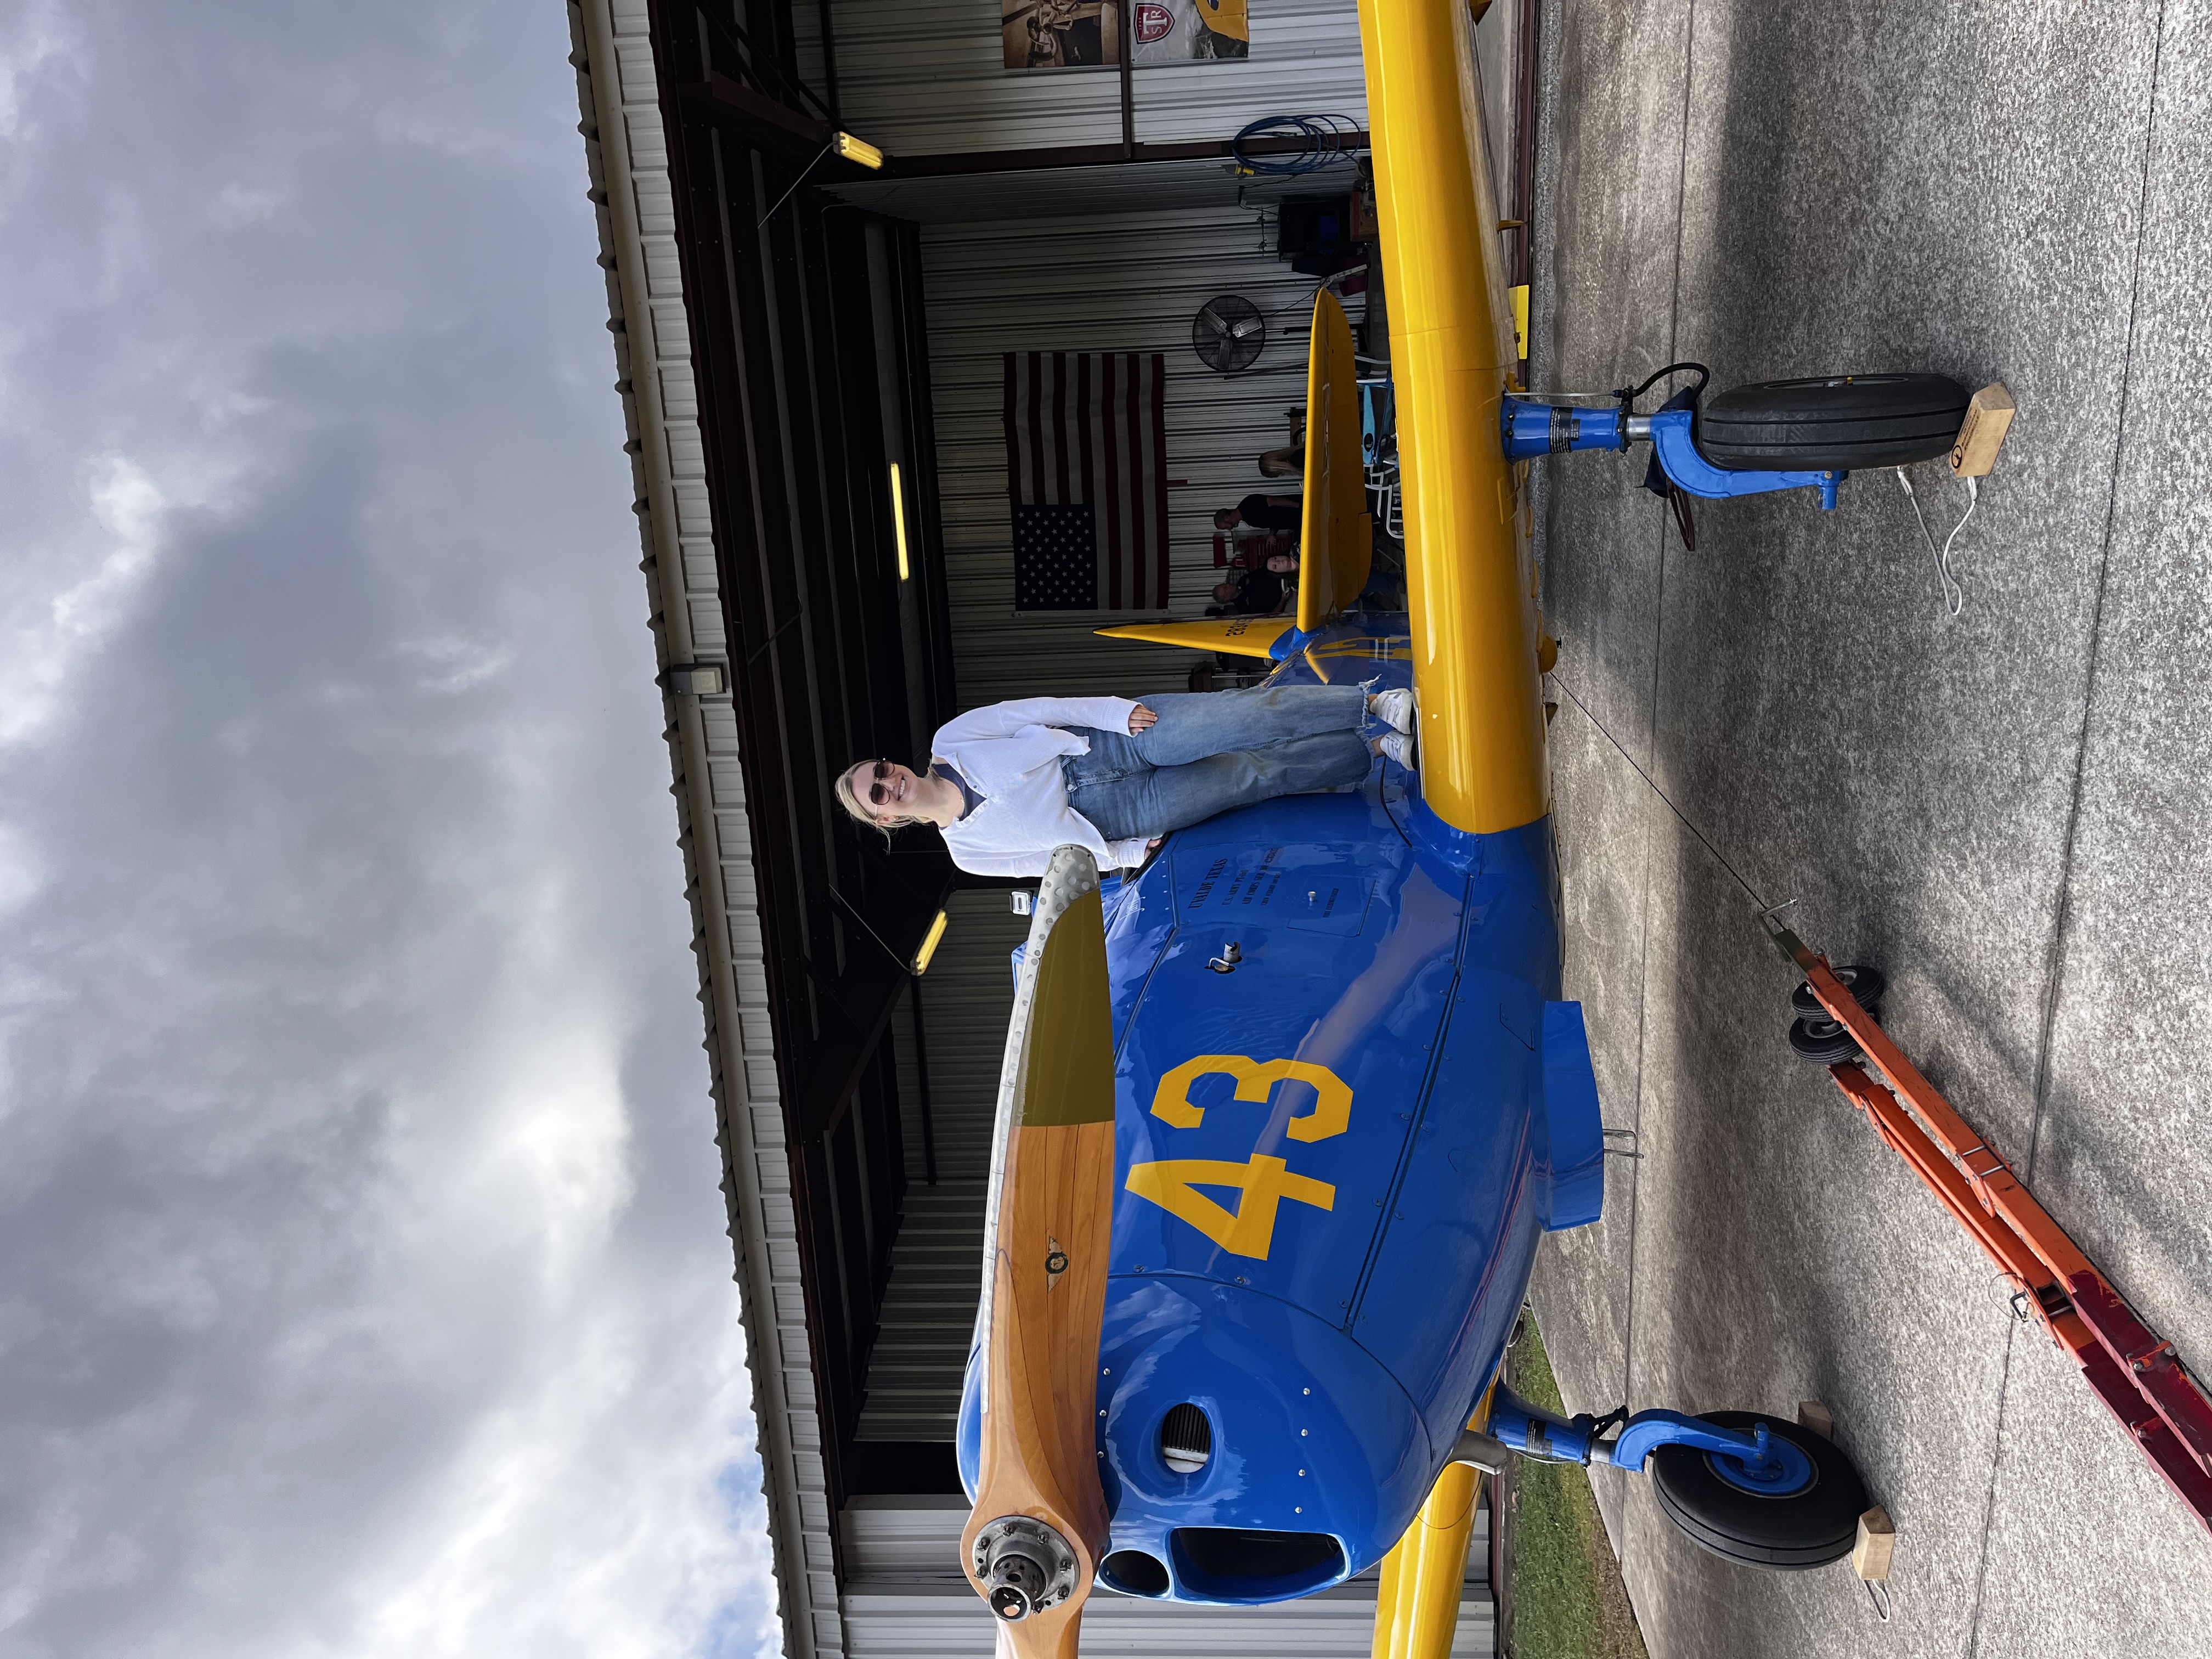 Journalism and mass communications major Karlie Rosenberry next to a WWII PT-19A aircraft. (Photograph Courtesy: Karlie Rosenberry) 